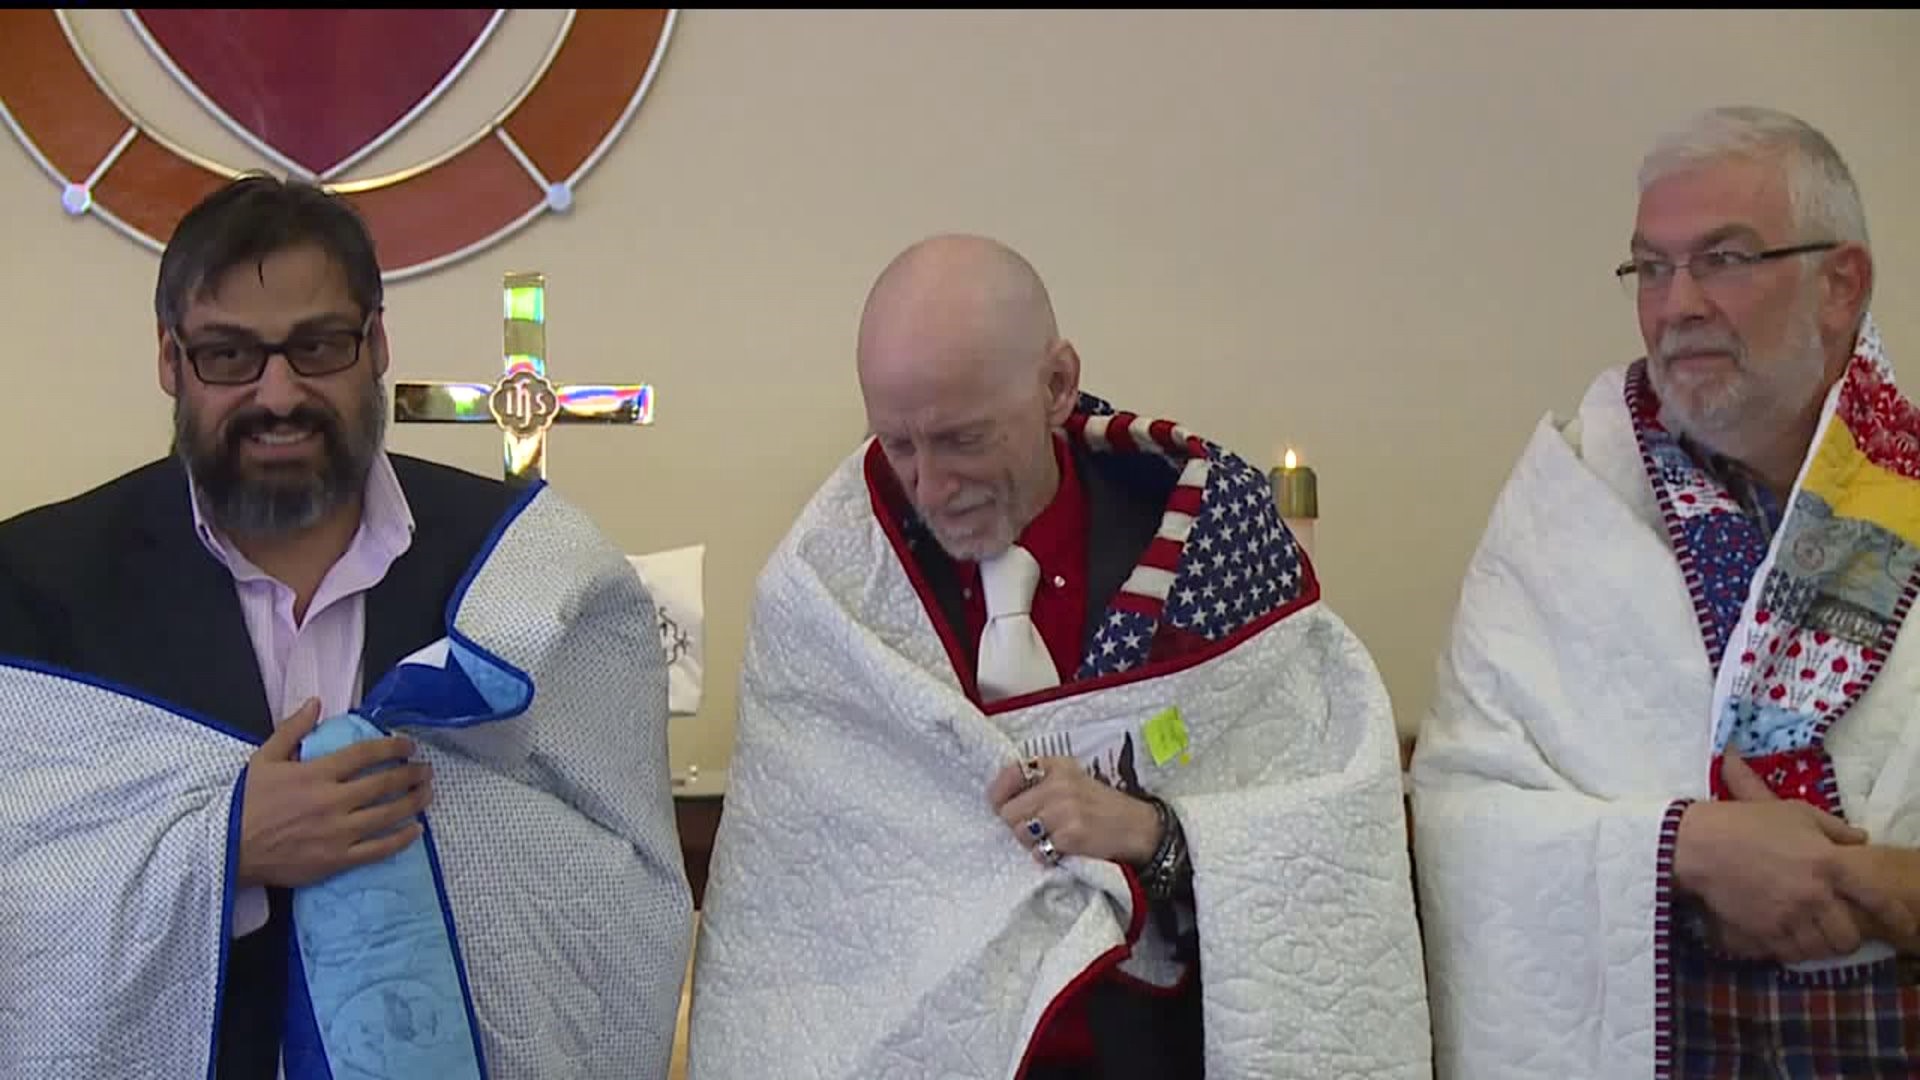 Metropolitan Community Church awards veterans with Quilts of Valor